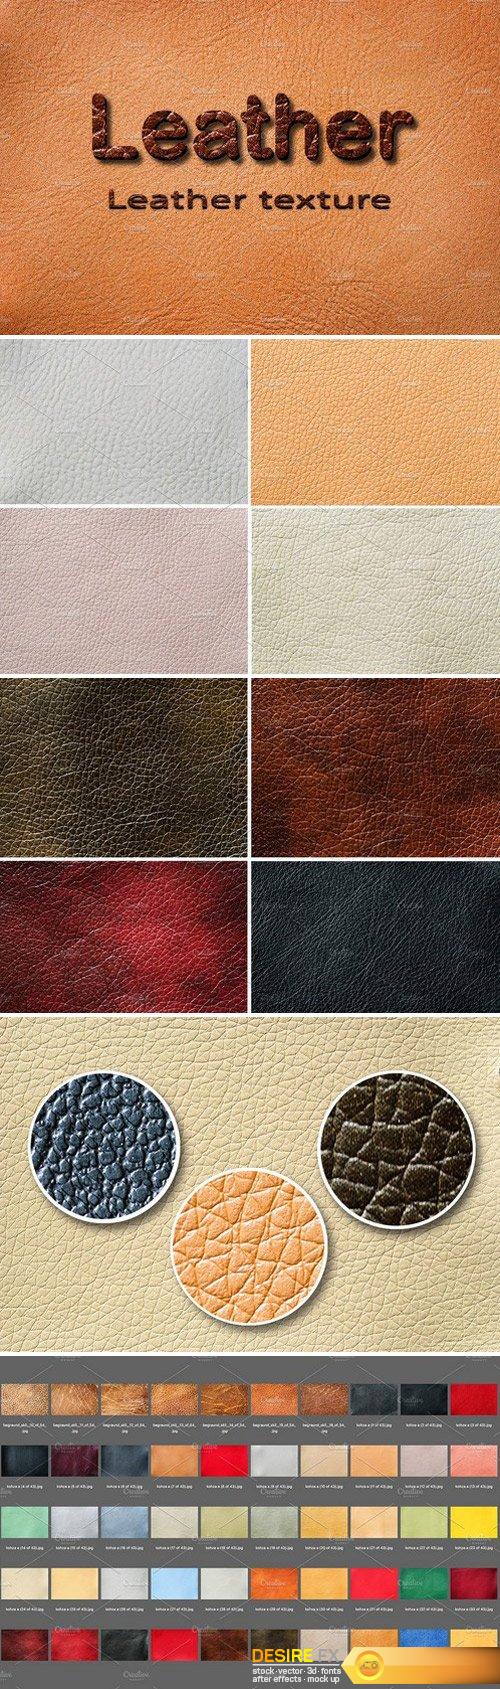 1509372768_set-of-leather-textures-1905737gfx